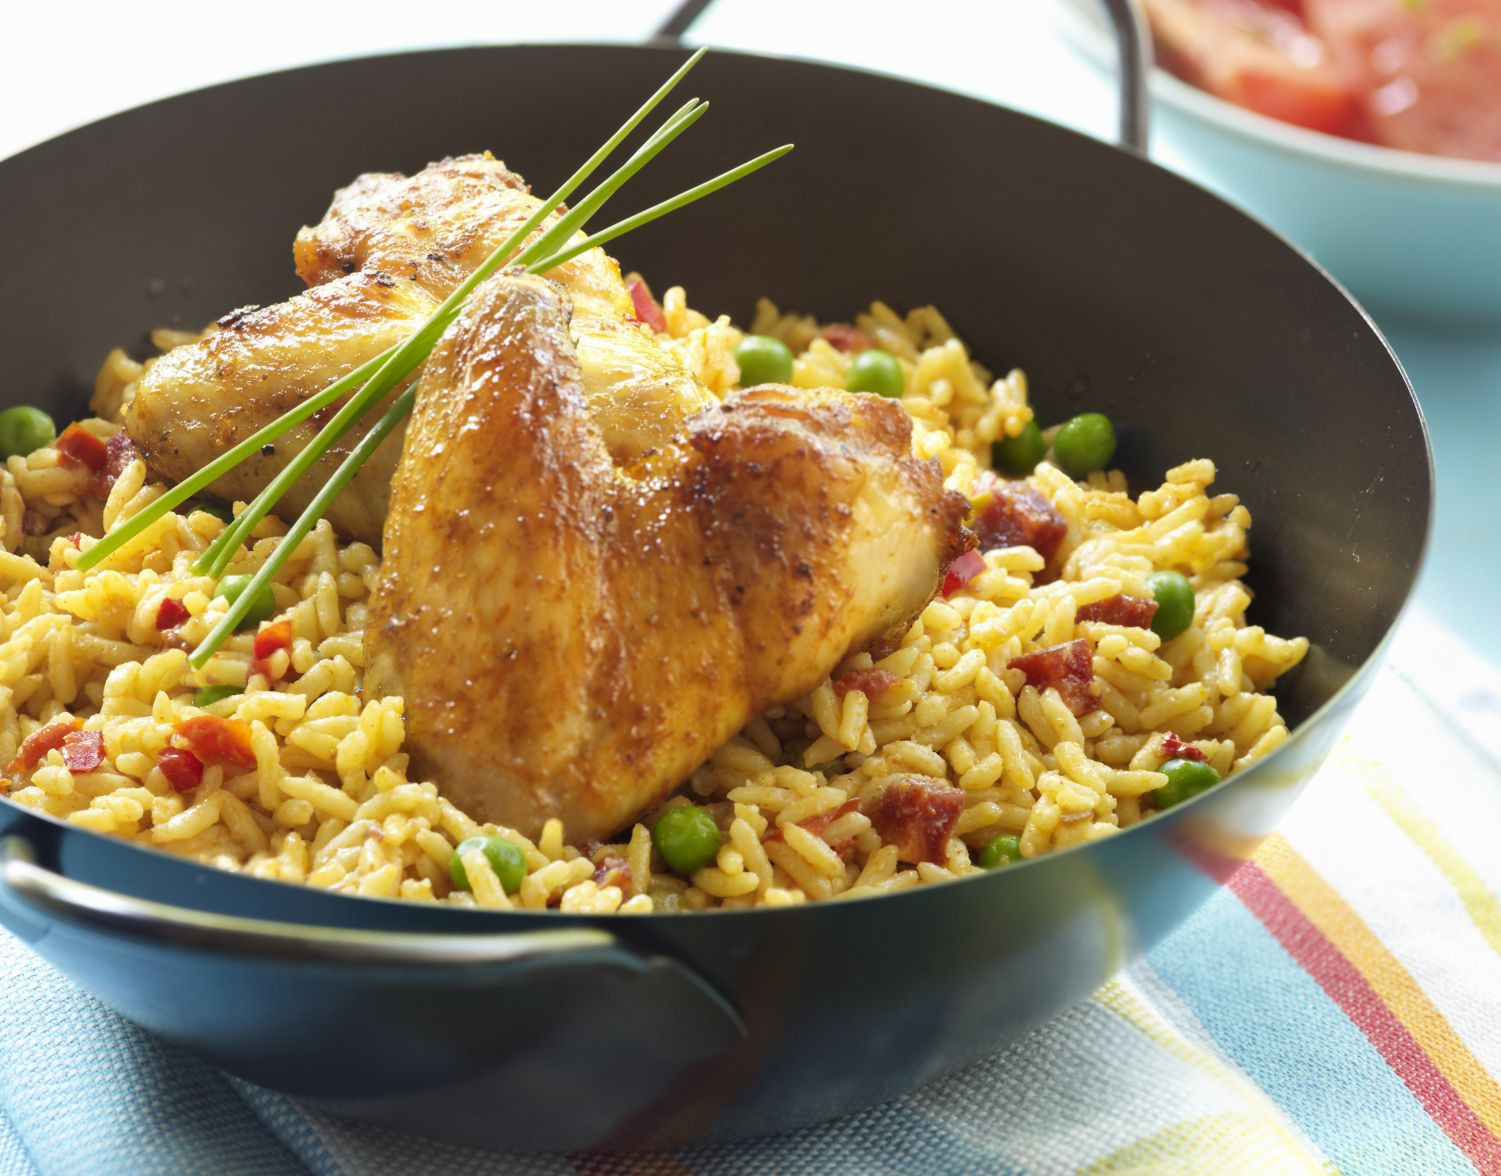 Baked Chicken and Yellow Rice Inspirational Baked Chicken with Yellow Rice Recipe